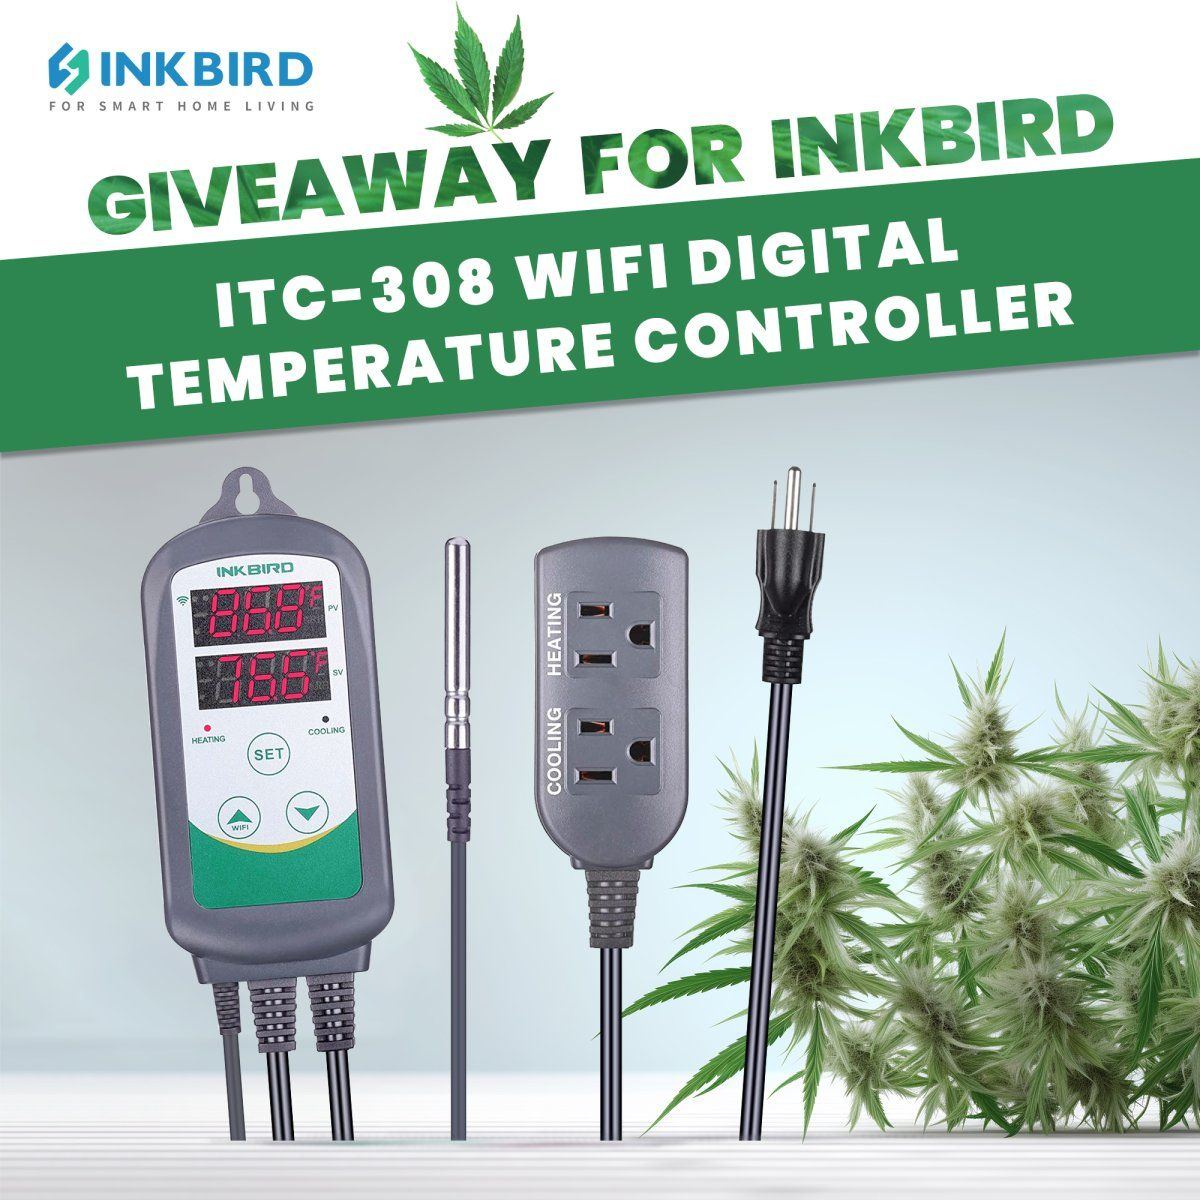 Inkbirds 420 giveaway is coming win a itc 308 controller